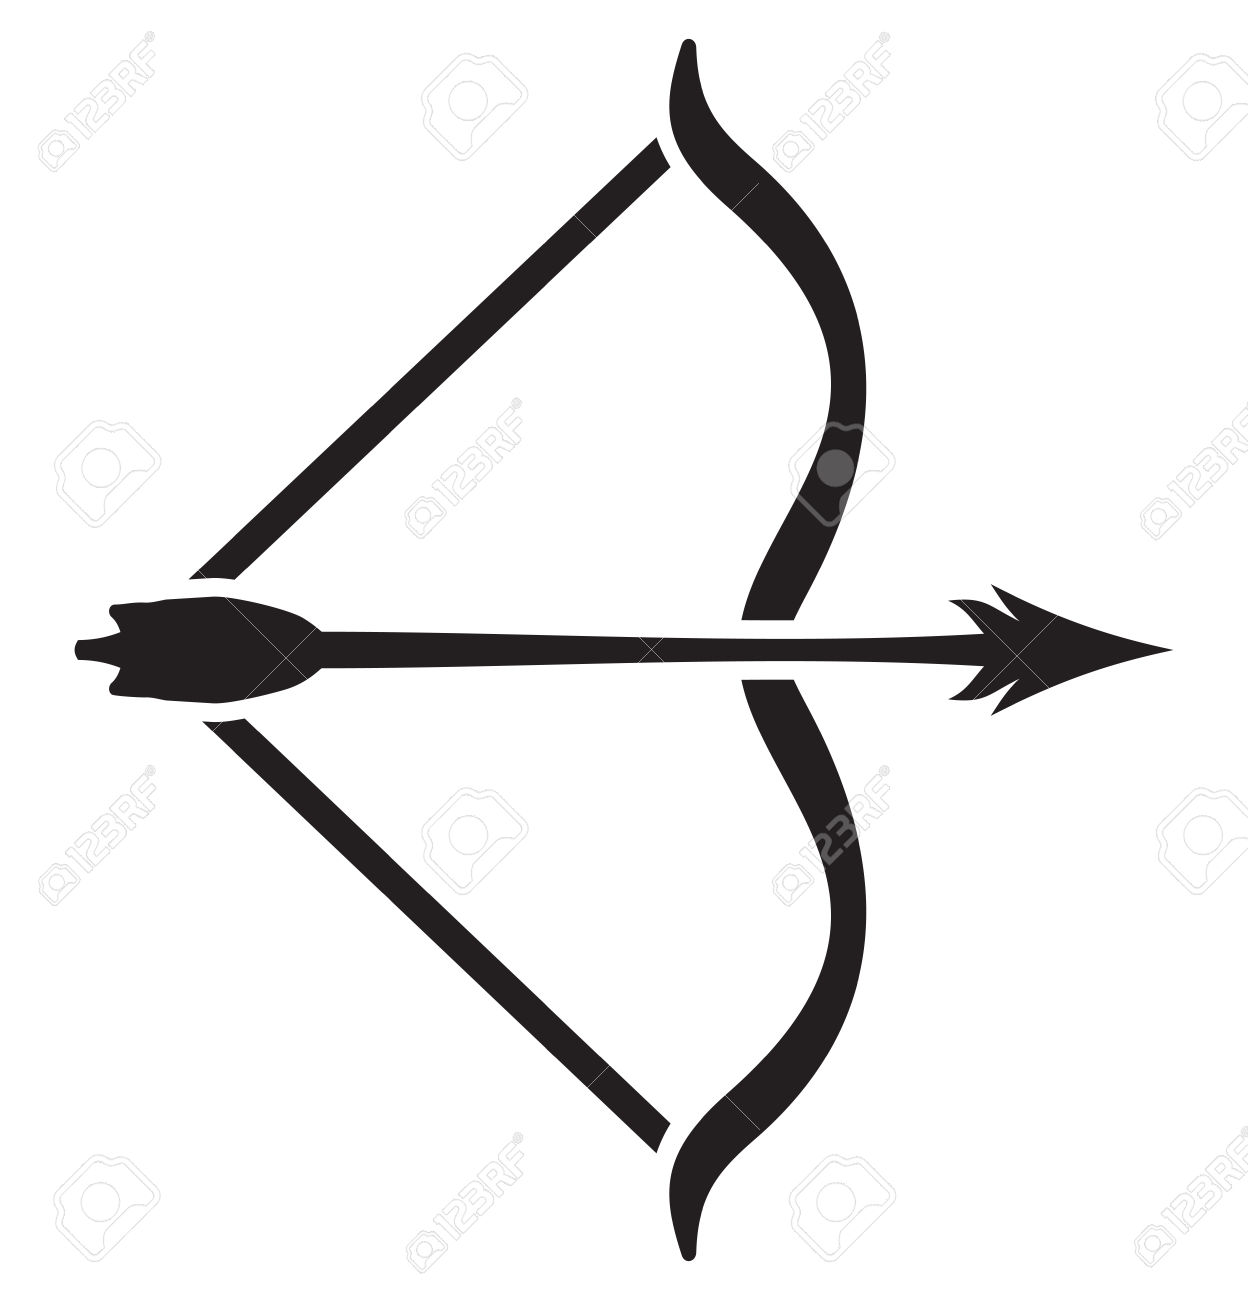 clipart of archery bow and arrow outline - Clipground